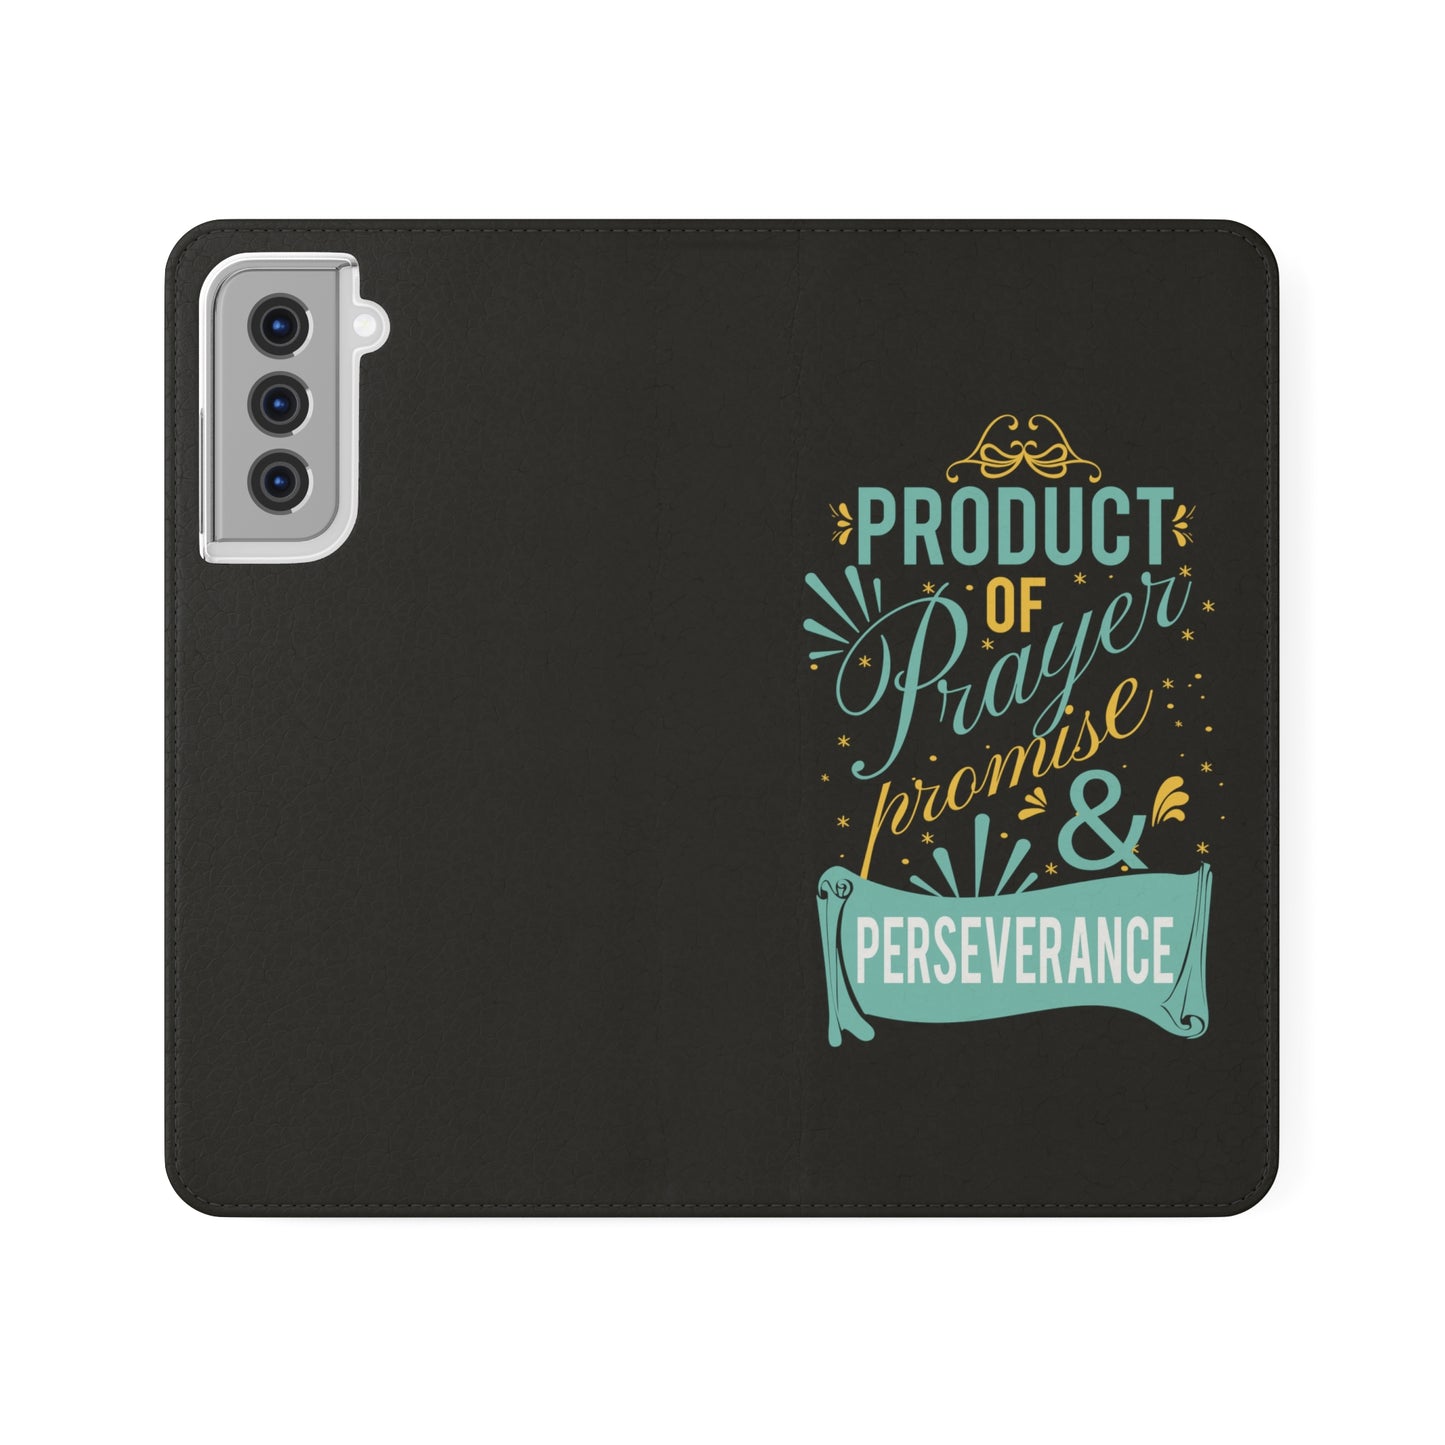 Product of Prayer, Promise, & Perseverance Phone Flip Cases